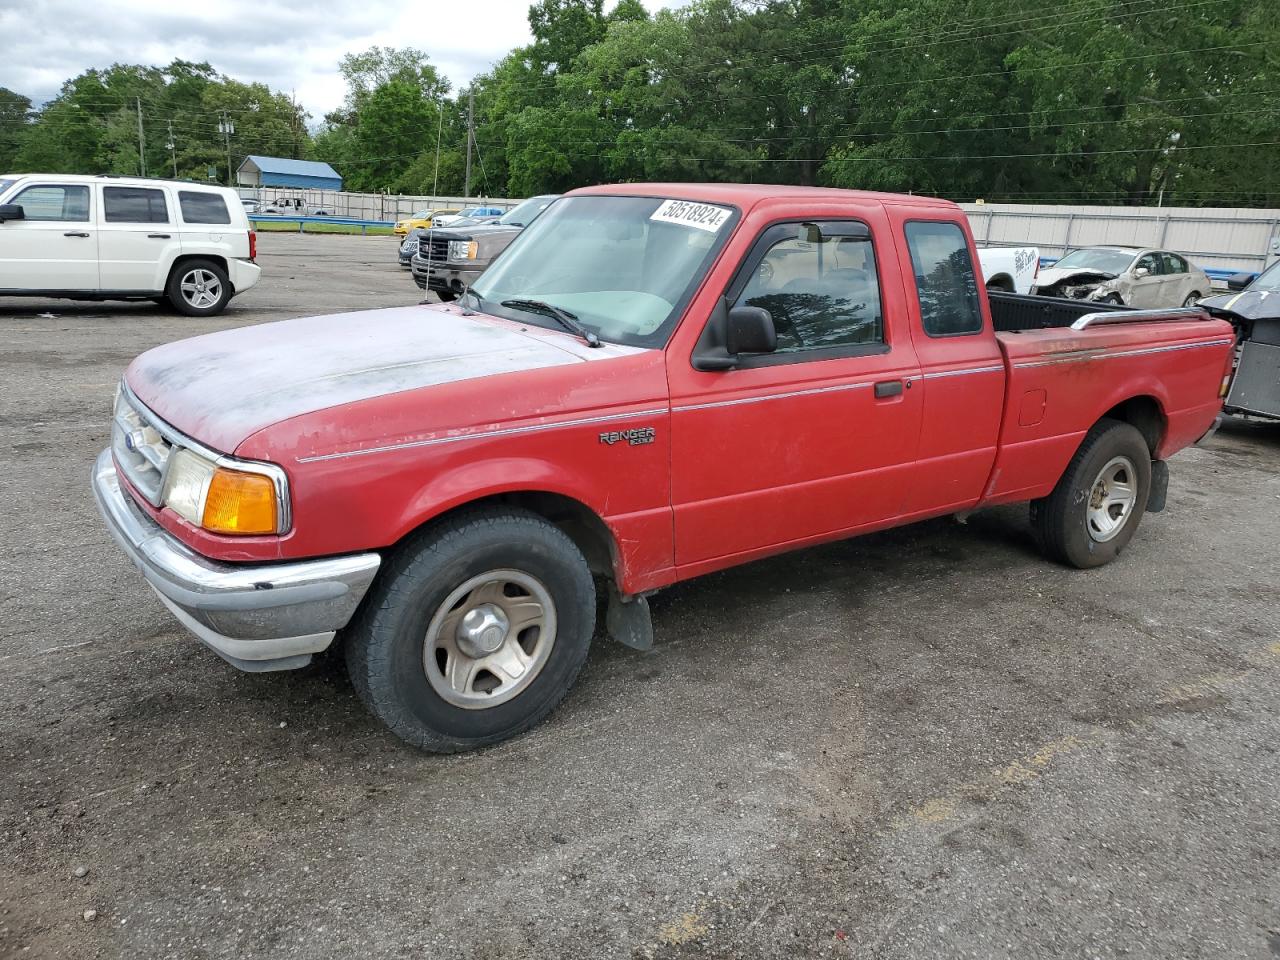 vin: 1FTCR14X5VTA04311 1FTCR14X5VTA04311 1997 ford ranger 4000 for Sale in 36613 8901, Al - Mobile, Eight Mile, Alabama, USA